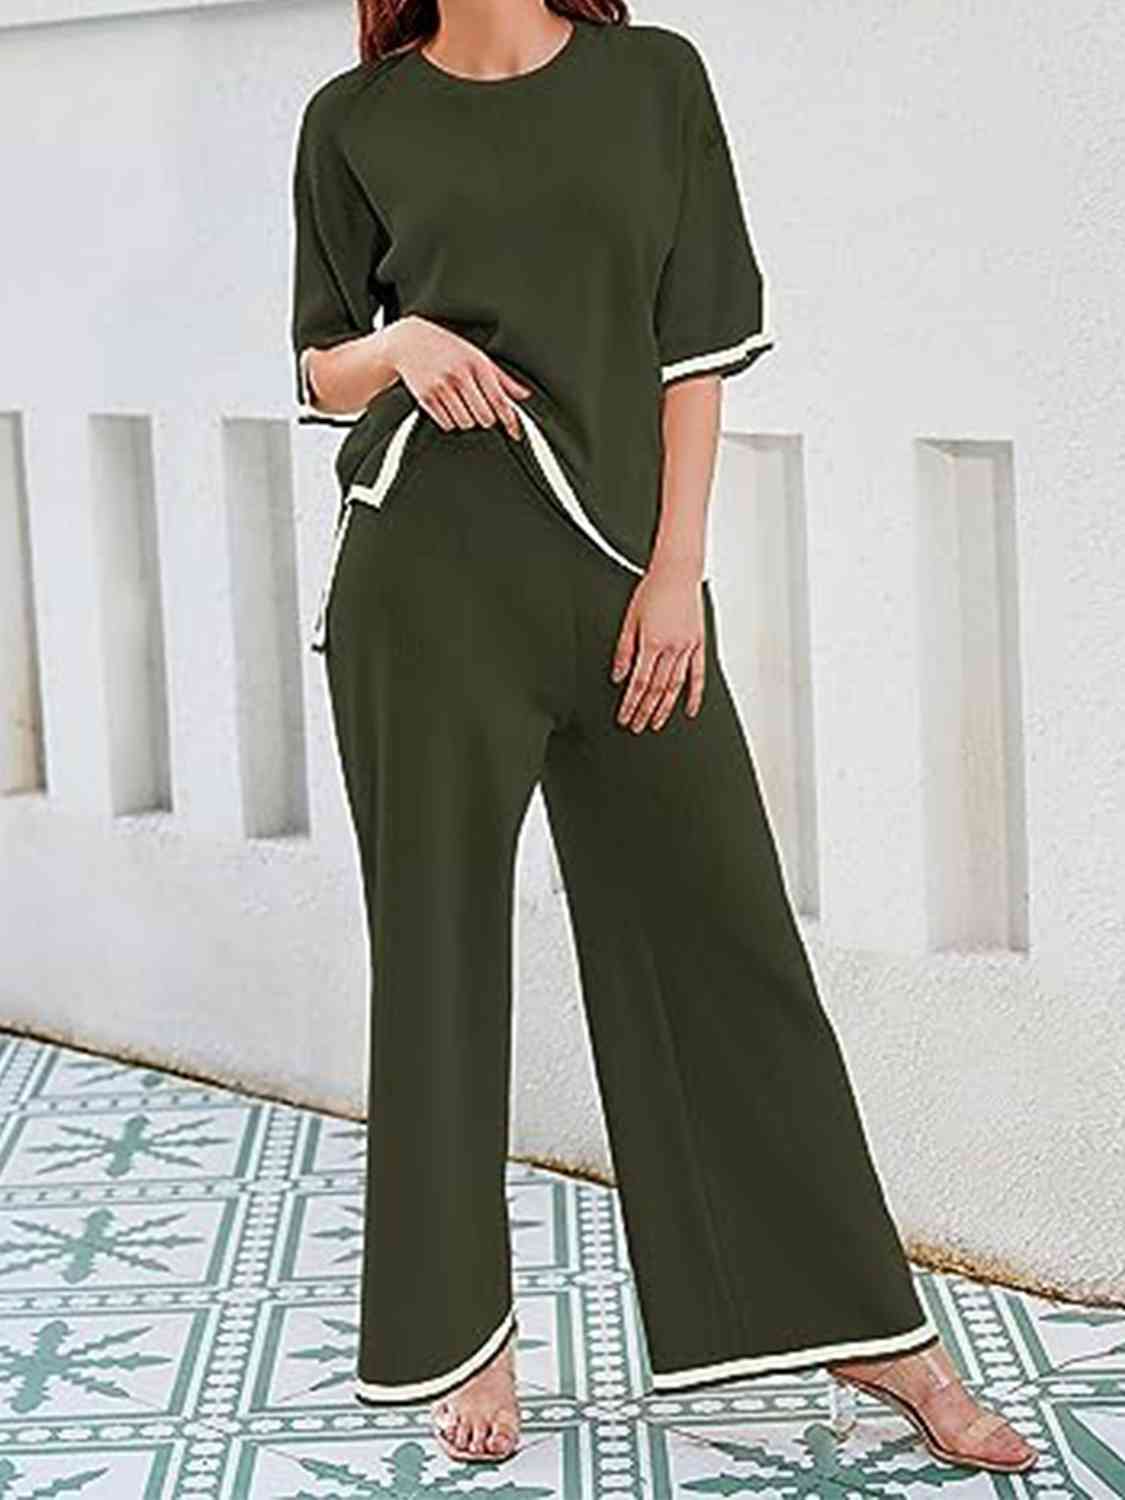 Women's Contrast High-Low Sweater and Knit Pants Set